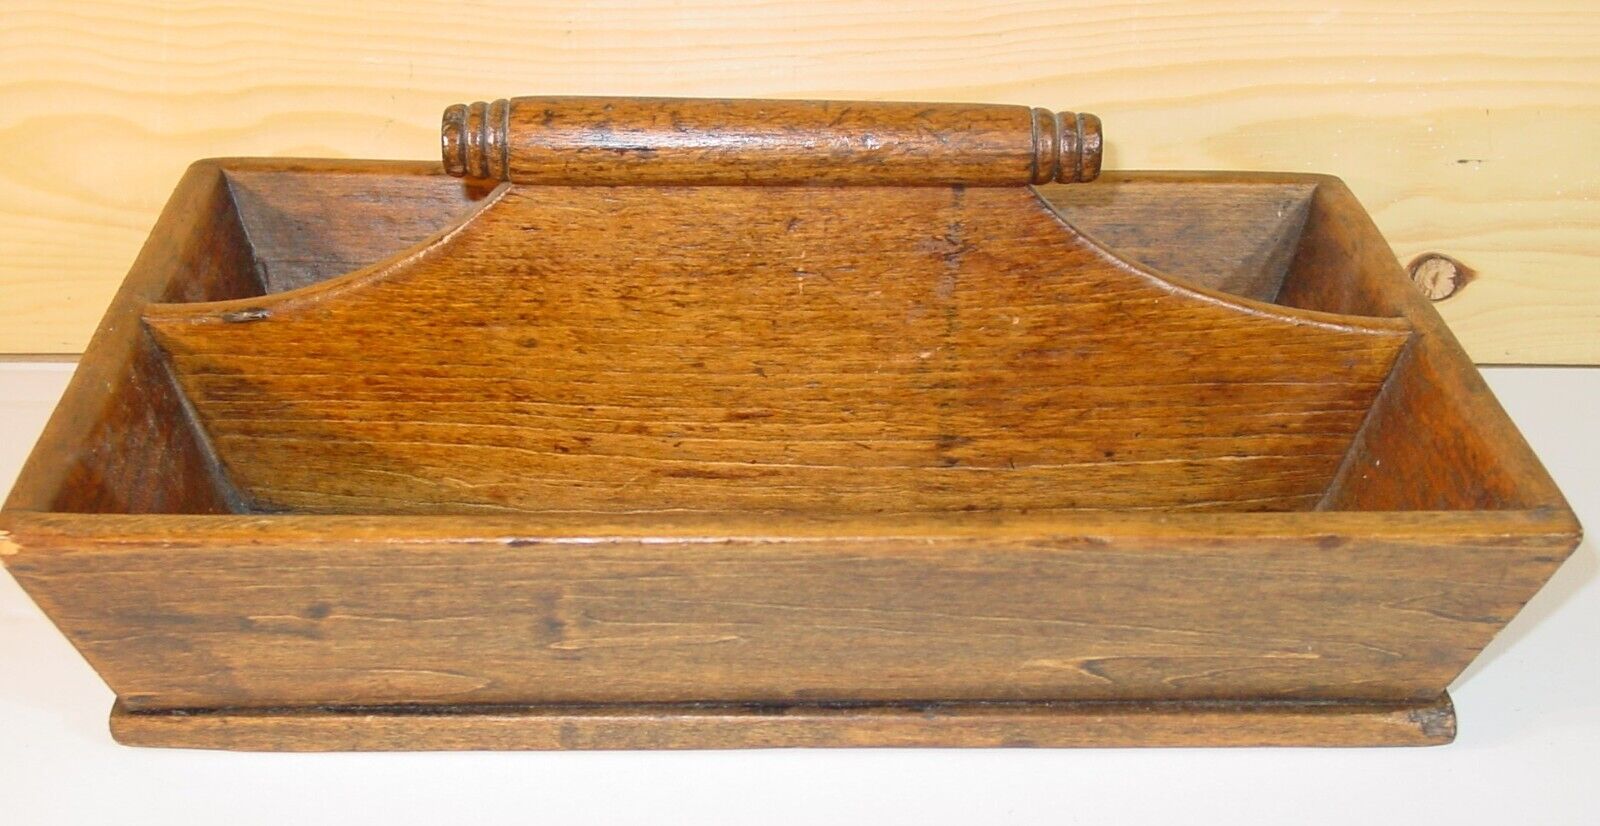 Early Antique Primitive Wood Box Tote Tool/ Utensil Carrier Tray MI Farmhouse